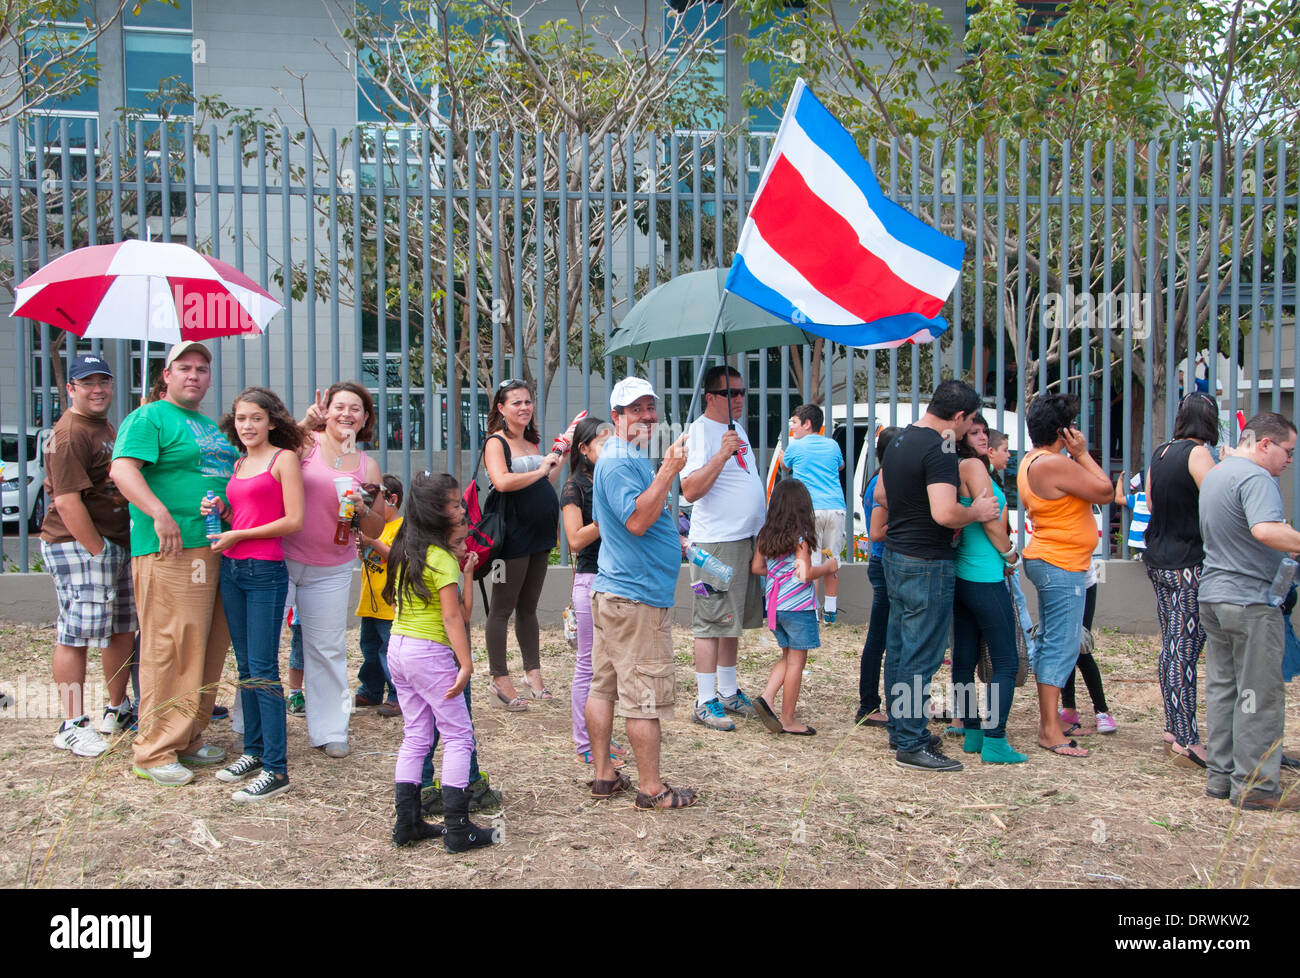 Santa Ana, Costa Rica. 02nd Feb, 2014. On Sunday February 1st 2014, Hundreds of people were waiting patiently in line in San José suburb of Santa Ana. Adults were here to accompany their children who were casting their symbolic votes to choose Costa Rica’s new president. The new leader will replace Laura Chinchilla who’s been leading this Latin American nation since 2010.  Children’s votes dates to 1978 and is an excellent demonstration of Costa Rica’s desire to be a leader in democracy and human rights in this part of the world. Credit:  Megapress/Alamy Live News Stock Photo